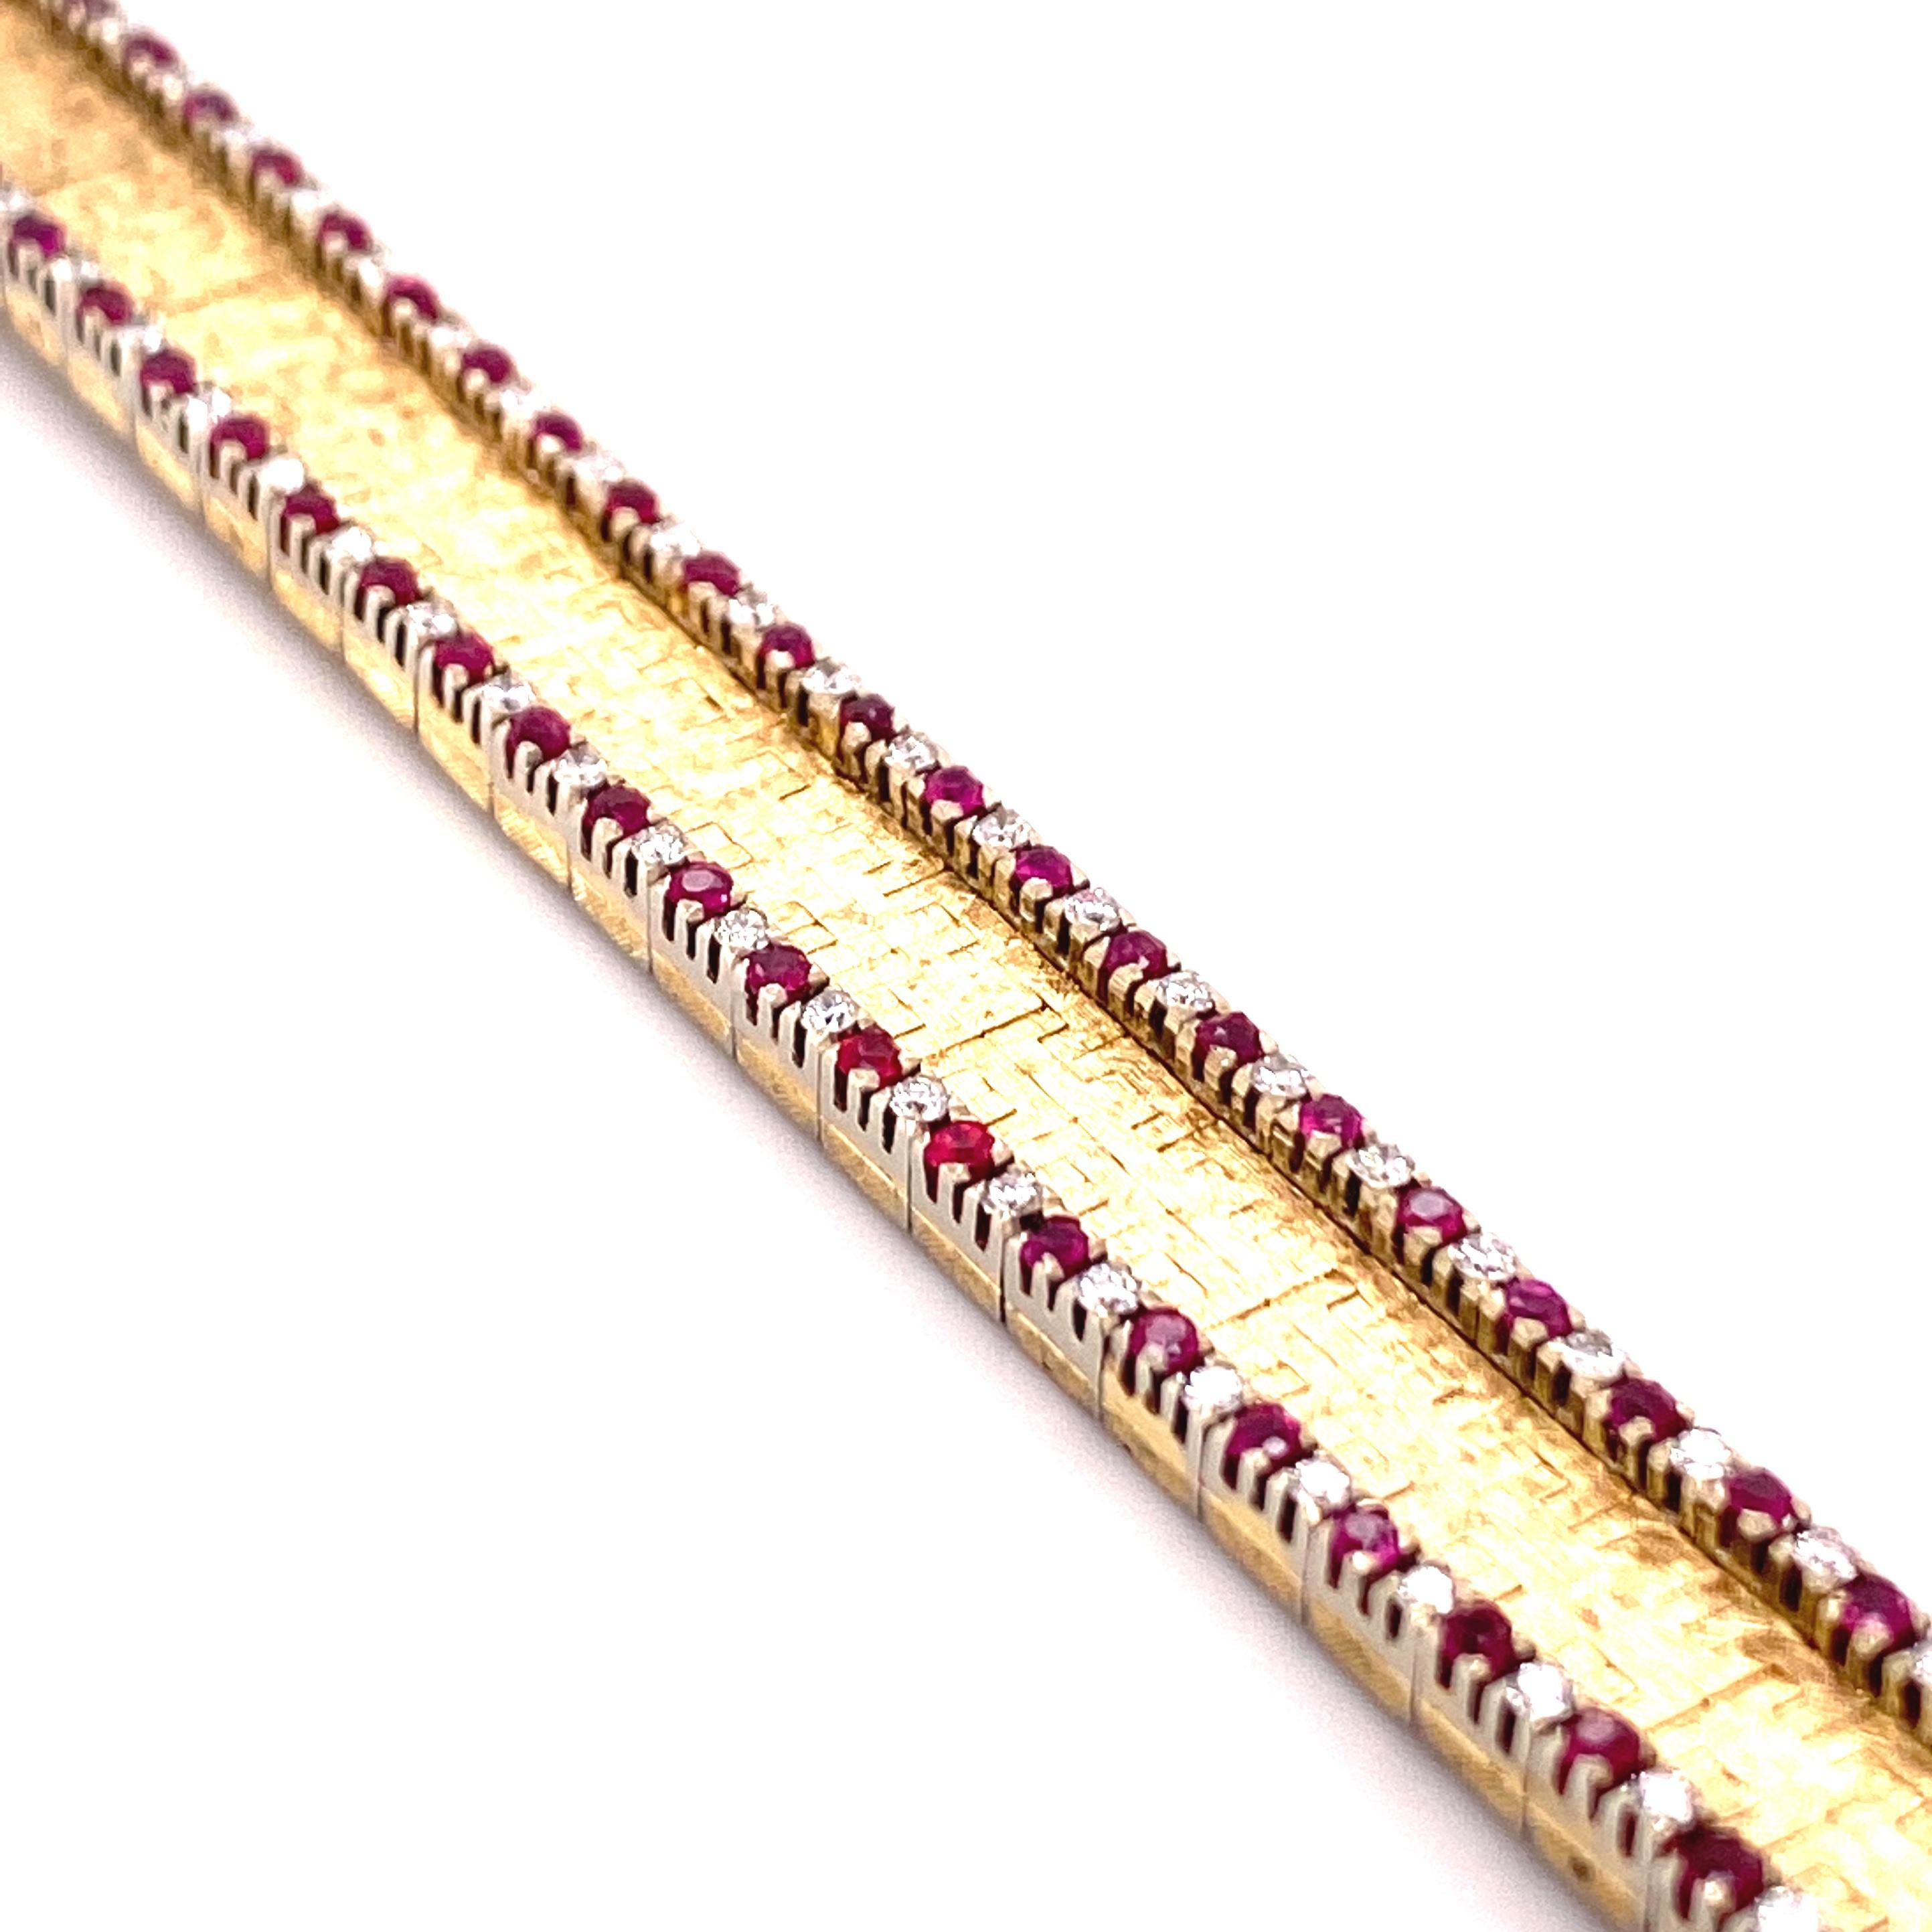 Timeless elegant bracelet in 18 karat gold with 90 round cut rubies and 90 brilliant cut diamonds, total weight of the rubies approximately 1.35 carats and of the diamonds 0.90 carats, G/H colour and vs clarity.
The rubies and diamonds are set